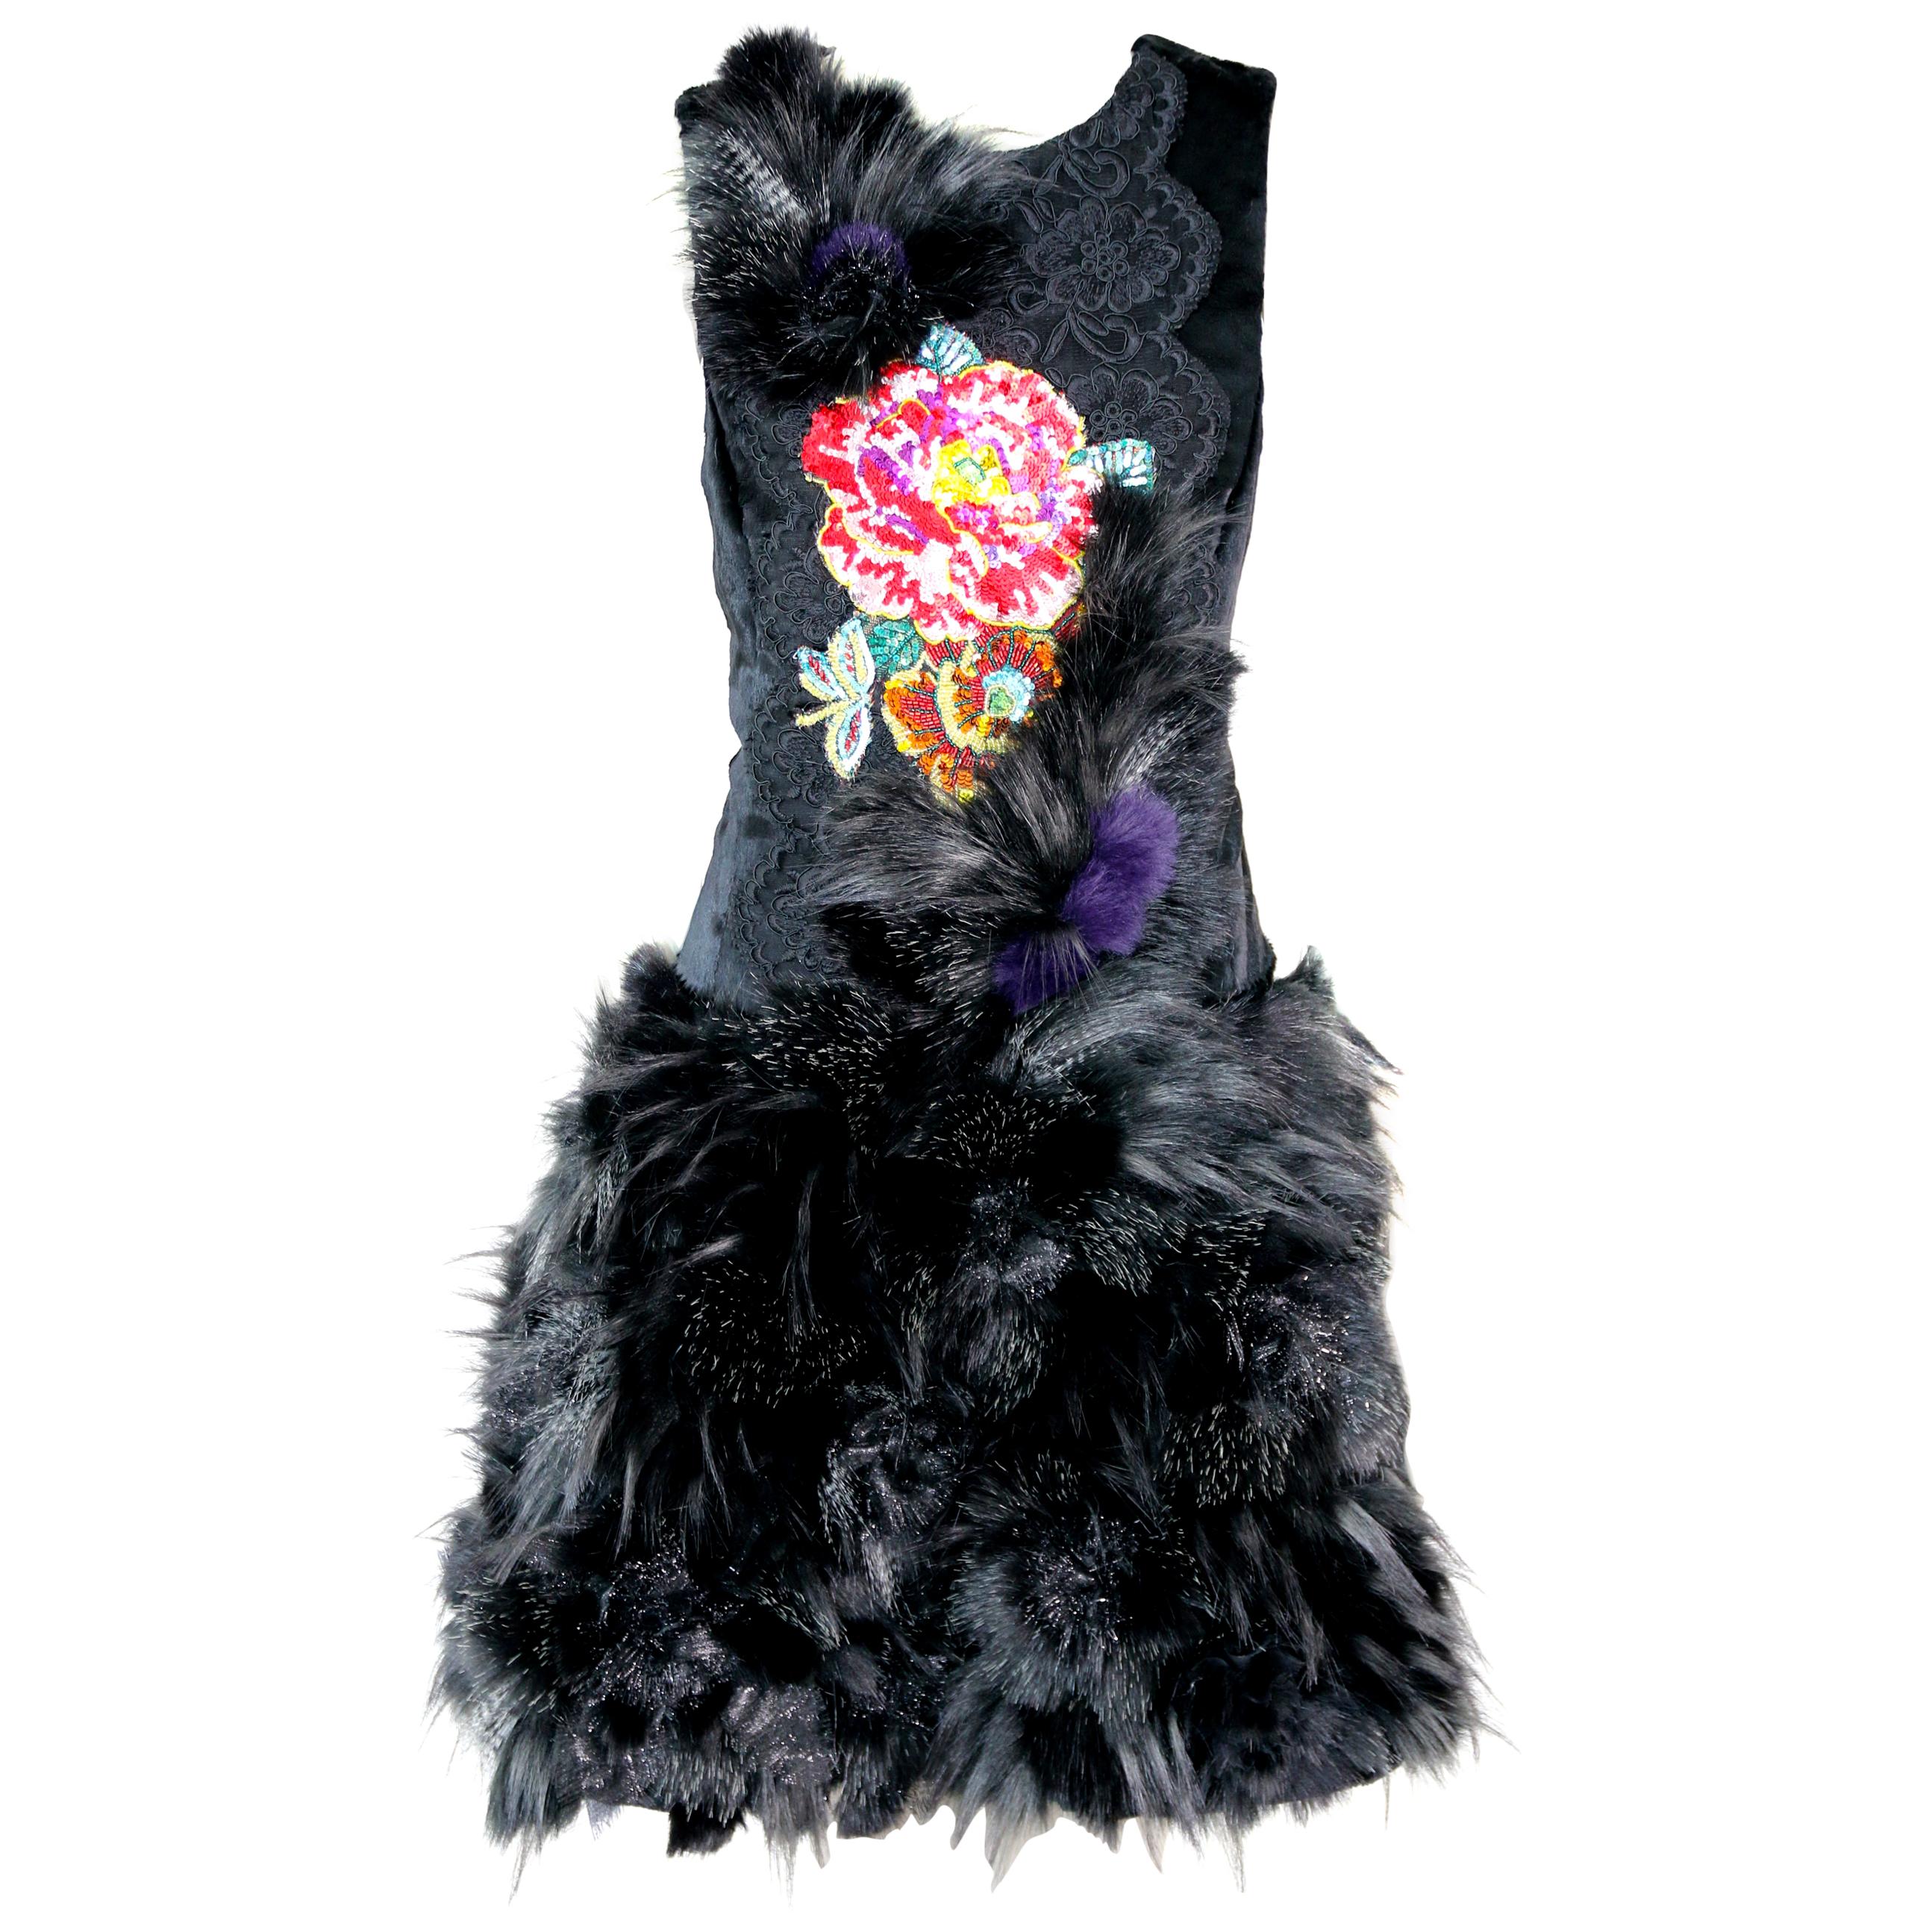 Pelush Black Faux Fur Dress With Three Dimensional Flowers And Embroidery - Sl